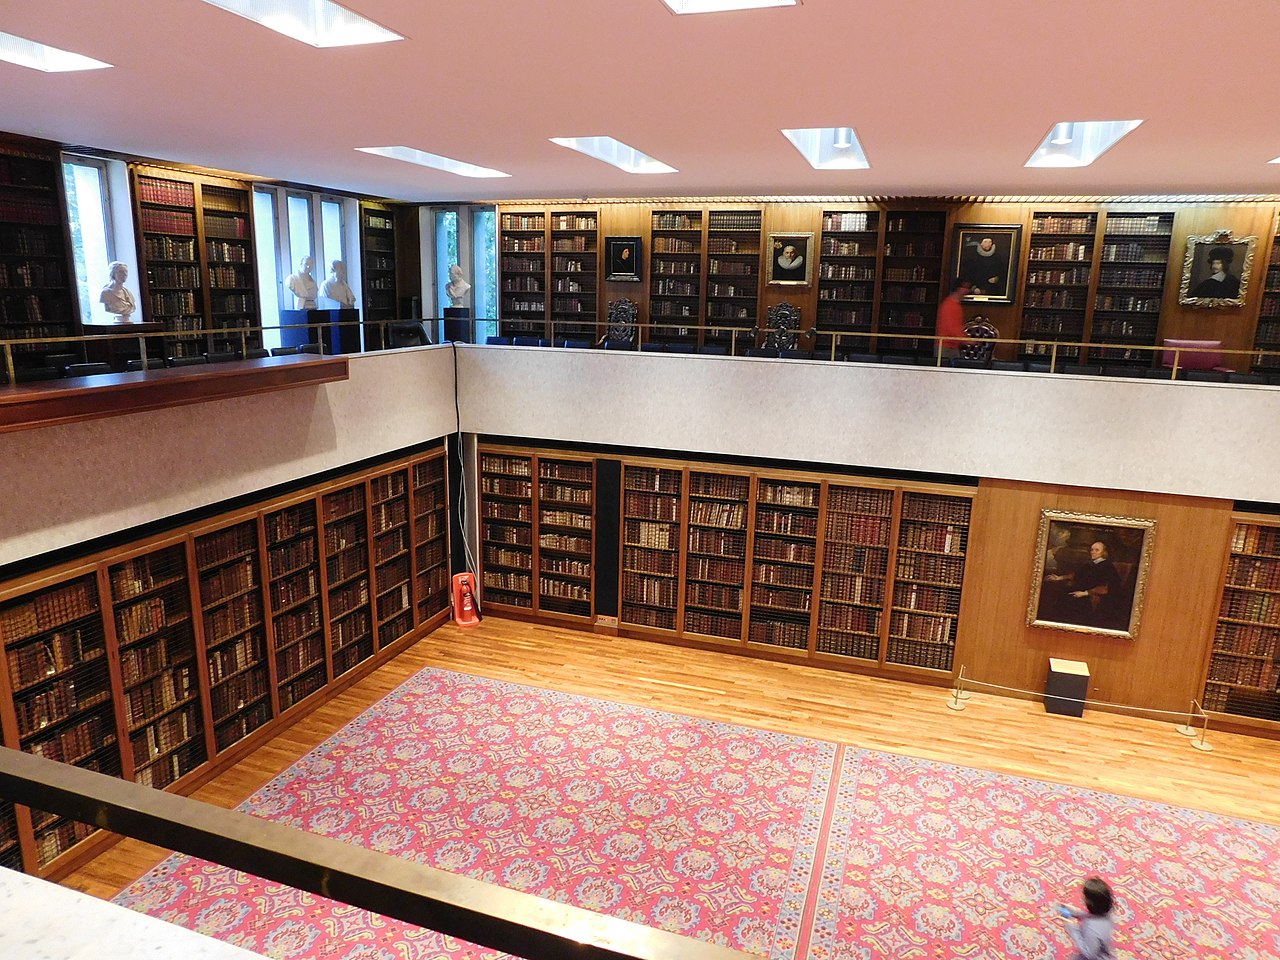 The Dorchester Library at the Royal College of Physicians